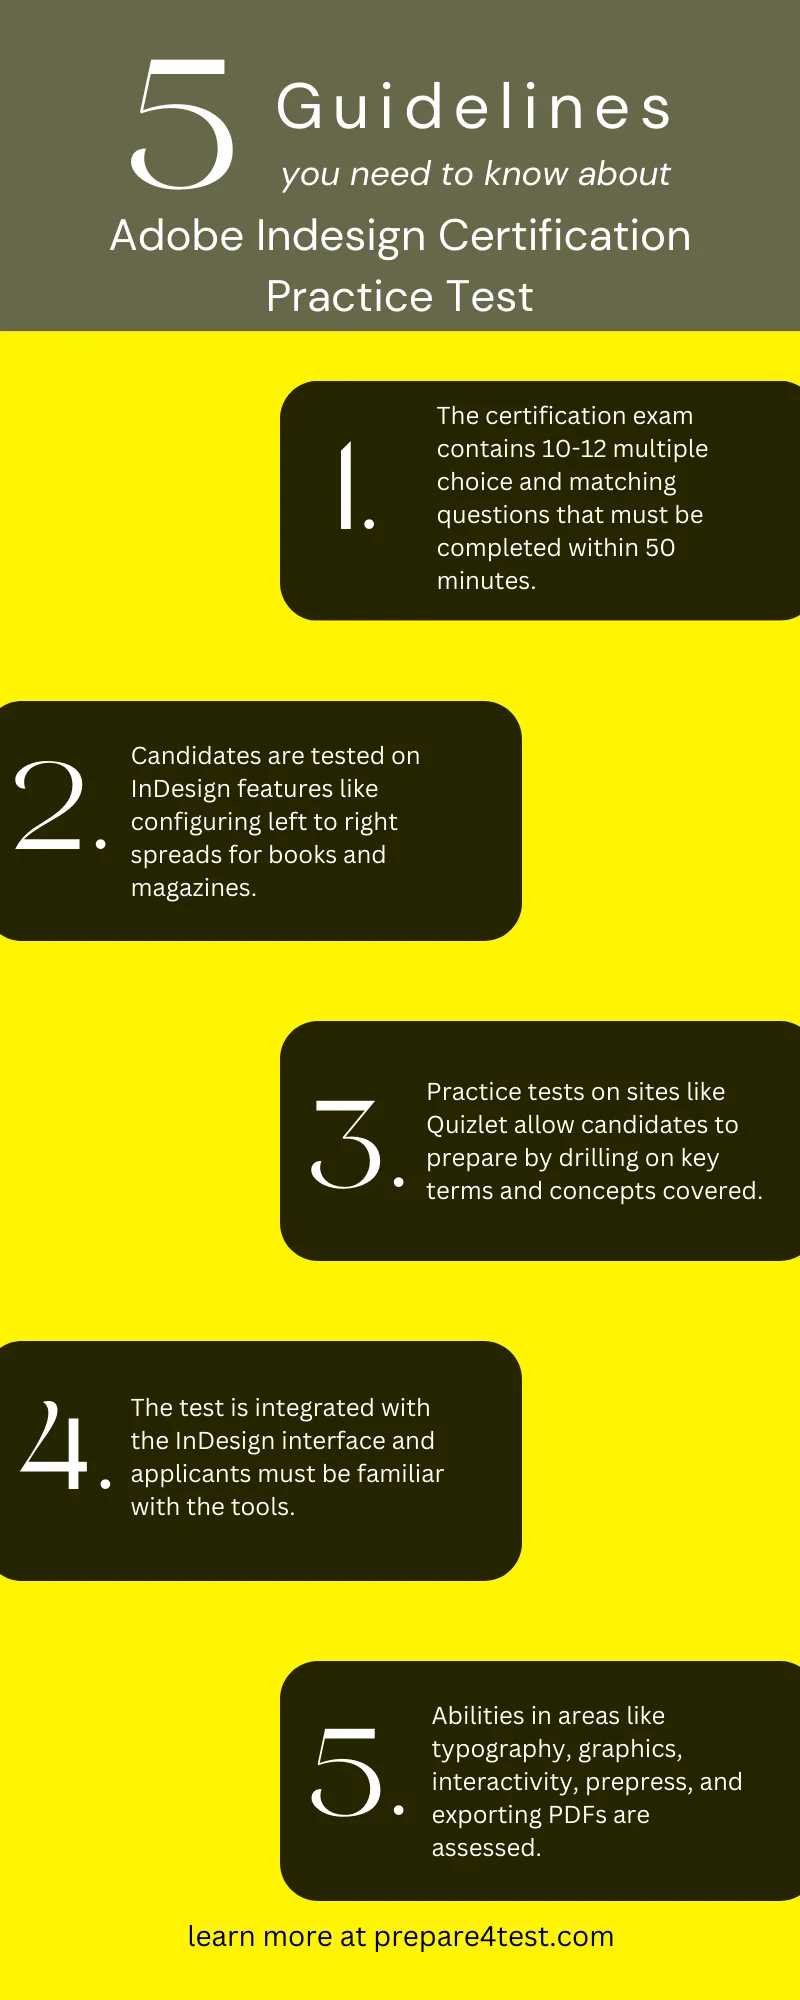 Adobe Indesign Certification Practice Test Infographic